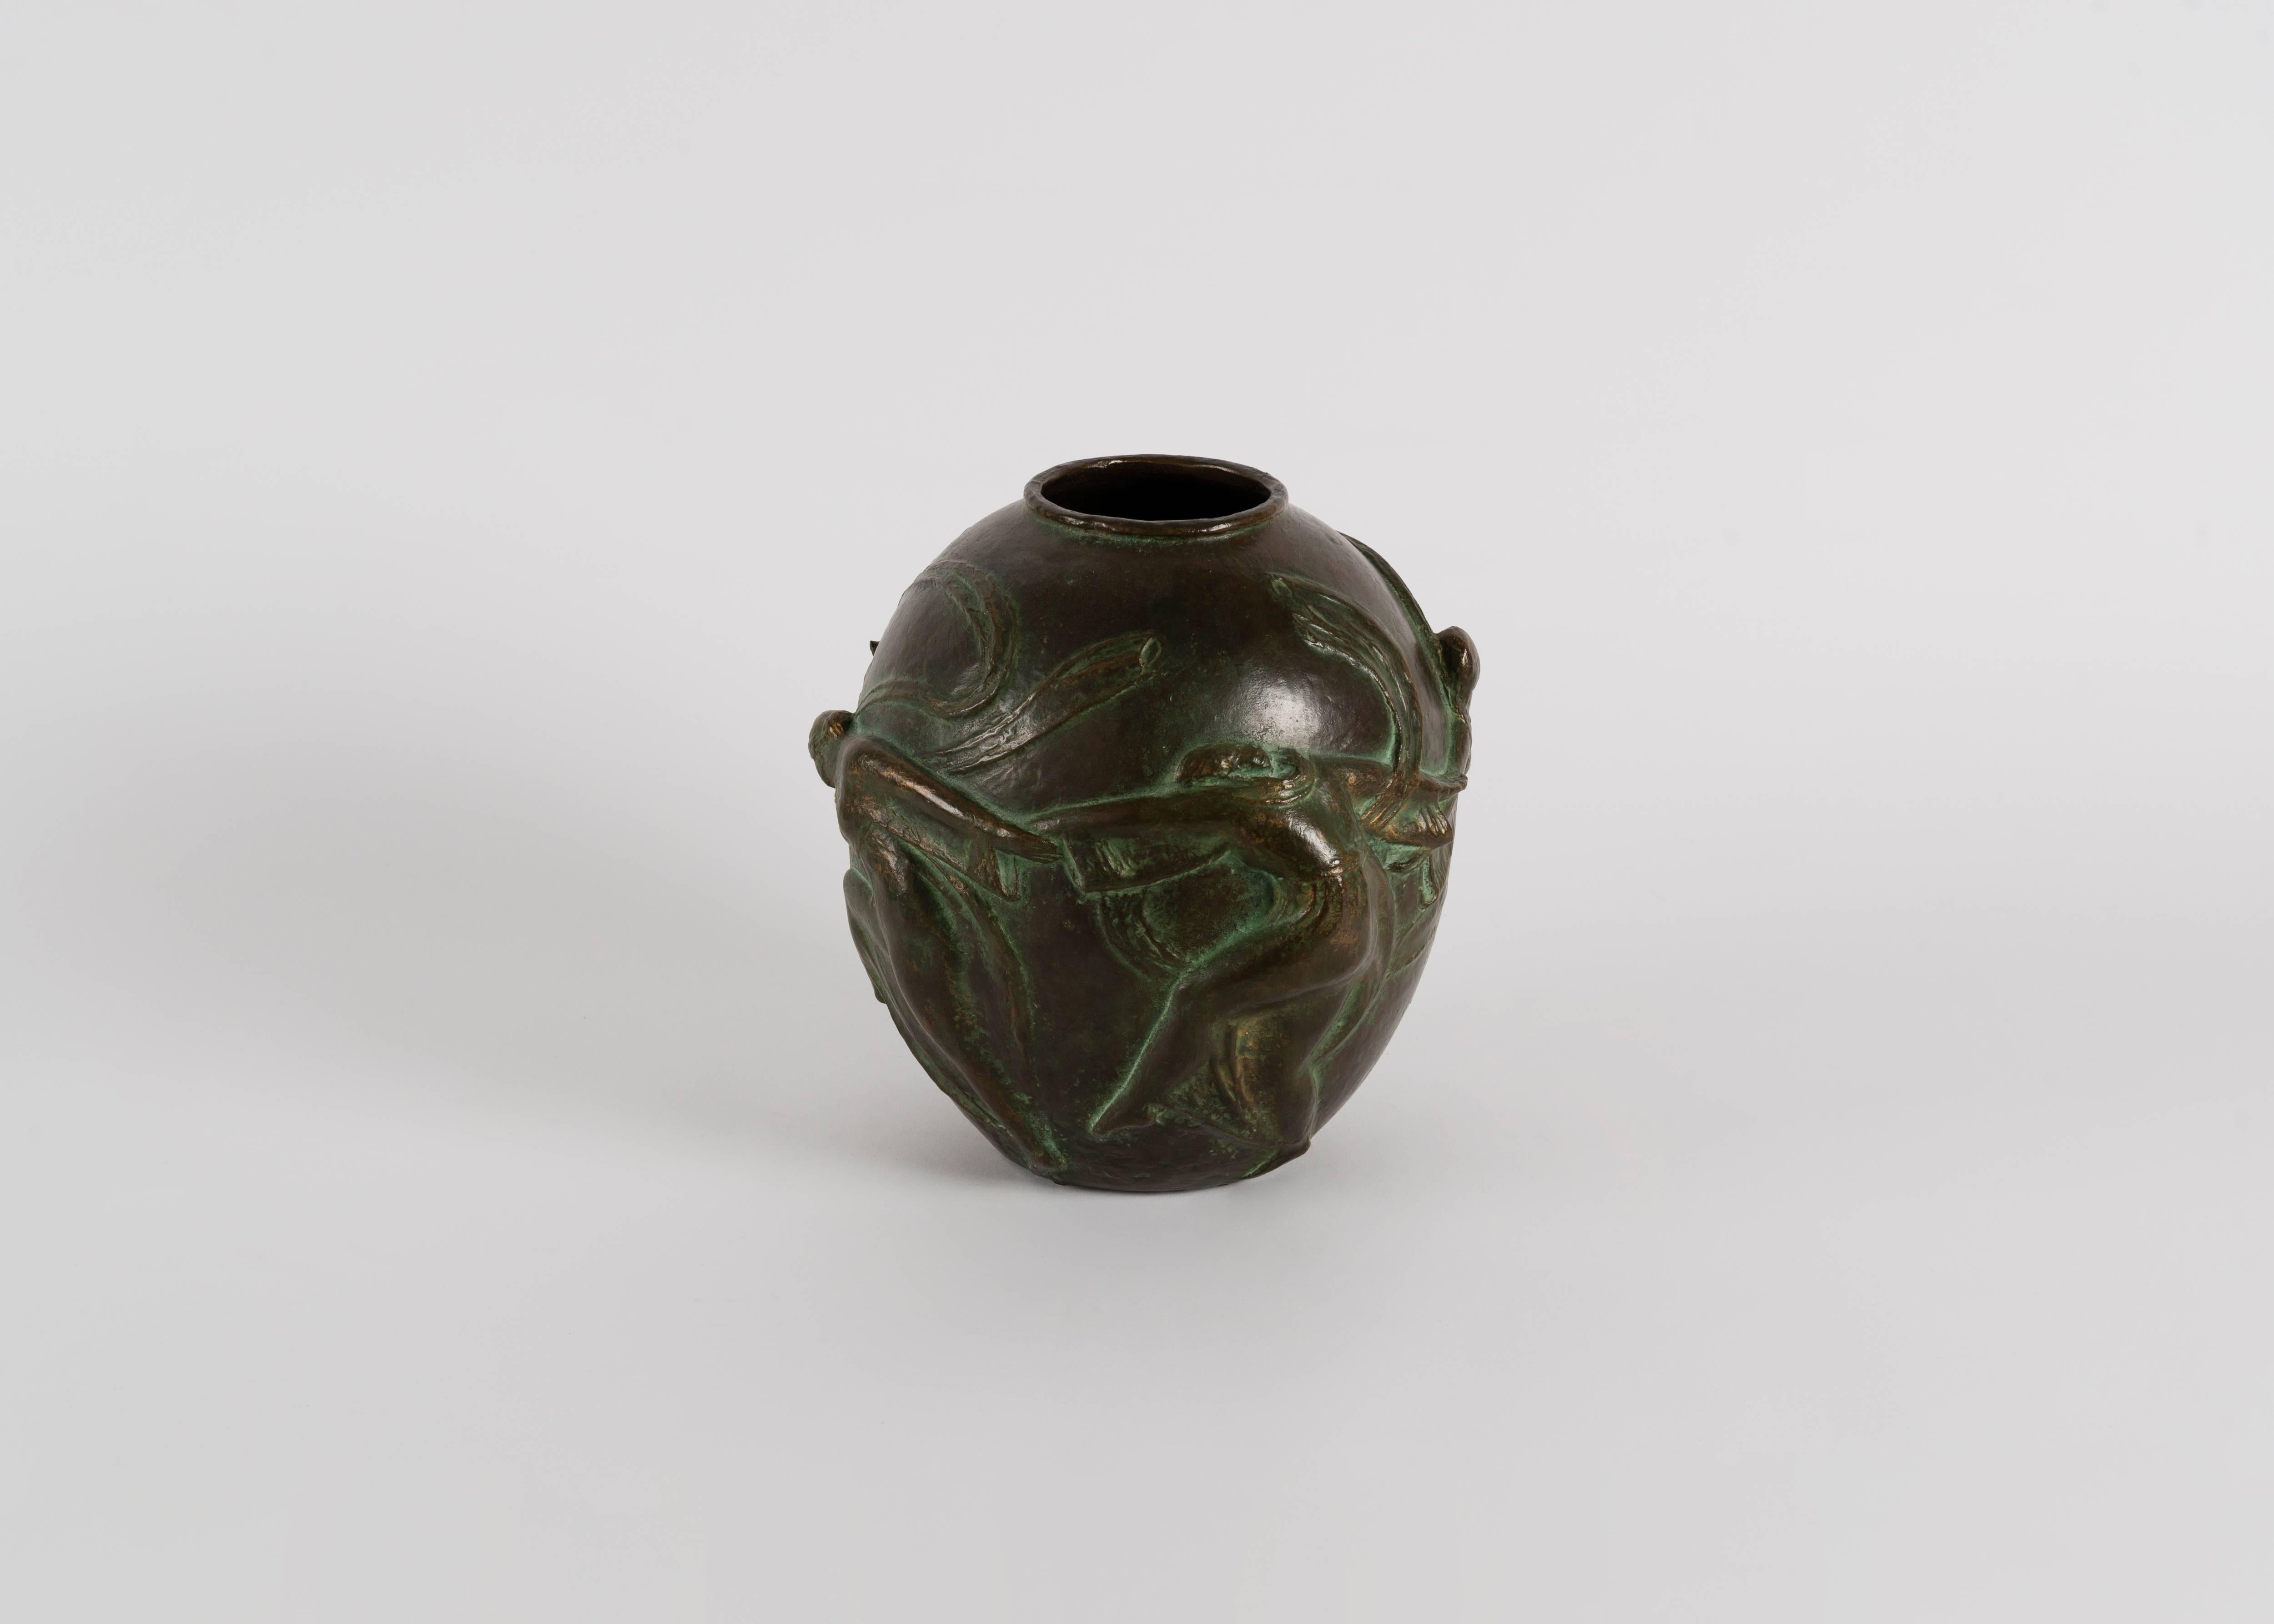 Vase with figural motifs by Fuji Koji. From the Taisho period, circa 1920s, Japan.